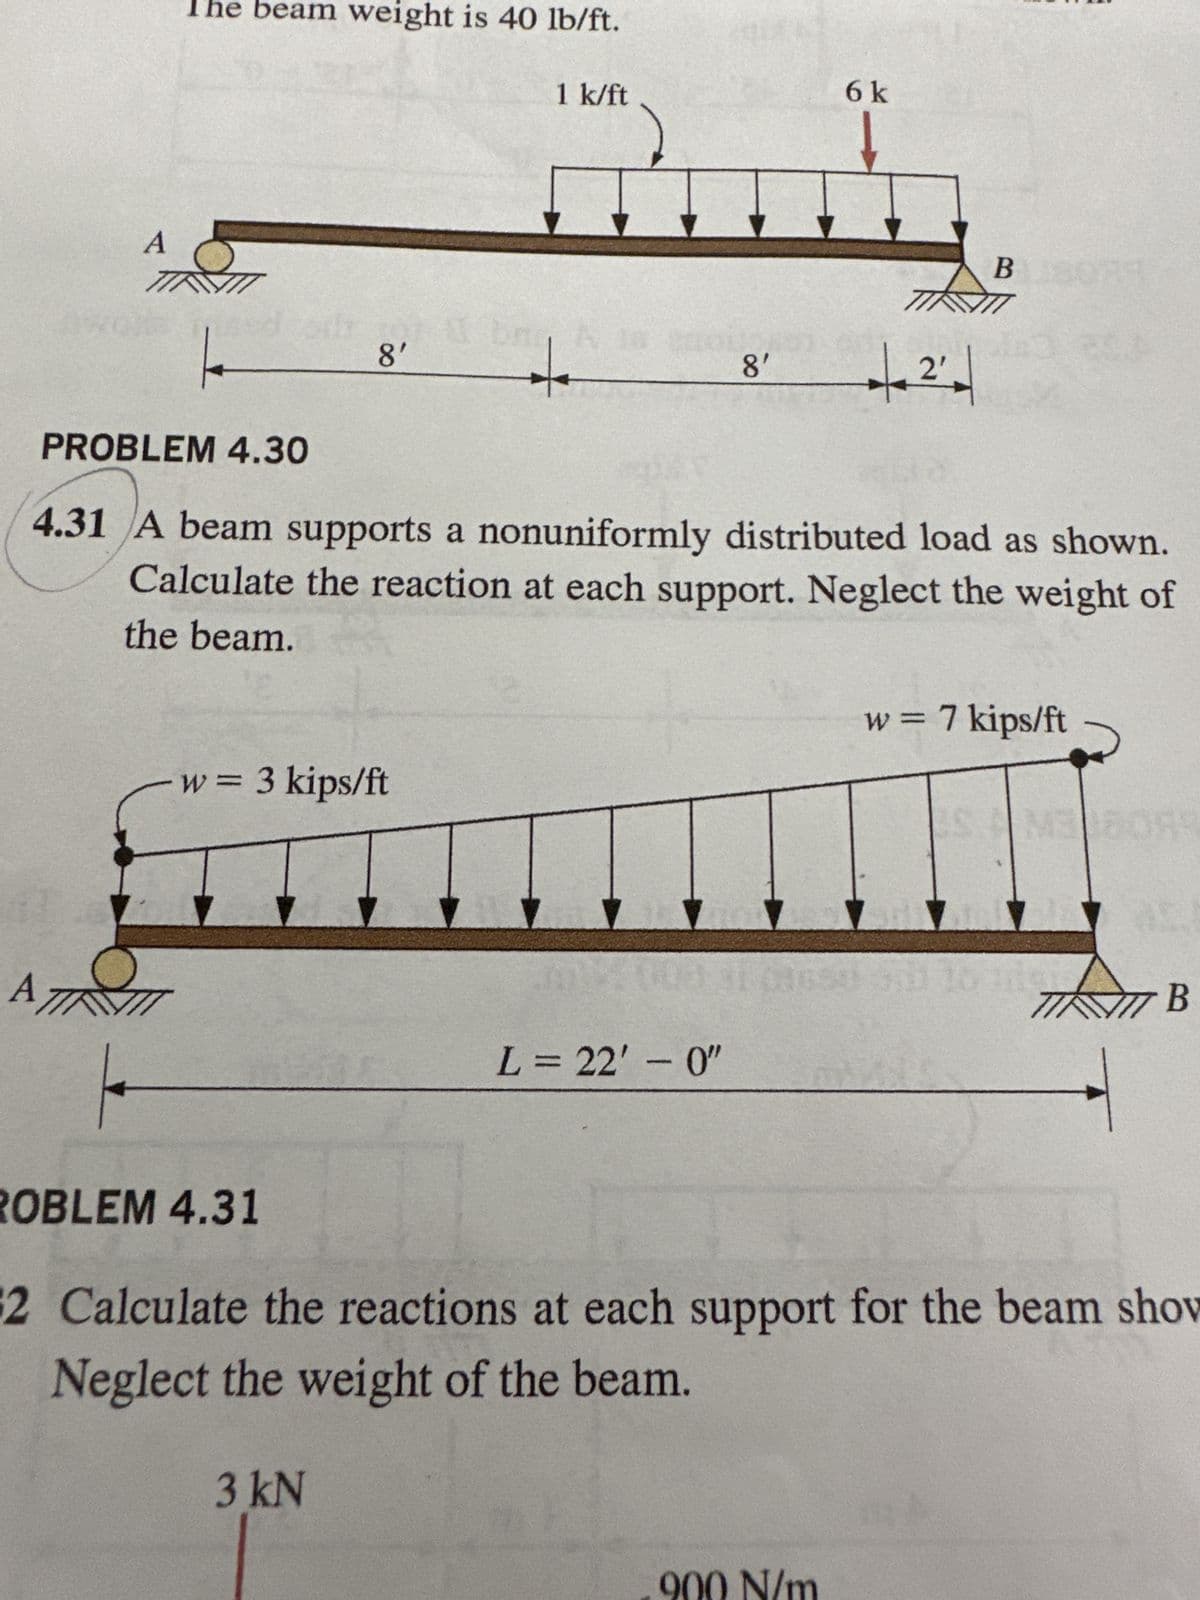 A
The beam weight is 40 lb/ft.
6 k
1 k/ft
A
8'
8'
2'
B 180
PROBLEM 4.30
4.31 A beam supports a nonuniformly distributed load as shown.
Calculate the reaction at each support. Neglect the weight of
the beam.
A
w = 3 kips/ft
w = 7 kips/ft
B
L = 22'-0"
ROBLEM 4.31
2 Calculate the reactions at each support for the beam show
Neglect the weight of the beam.
3kN
900 N/m